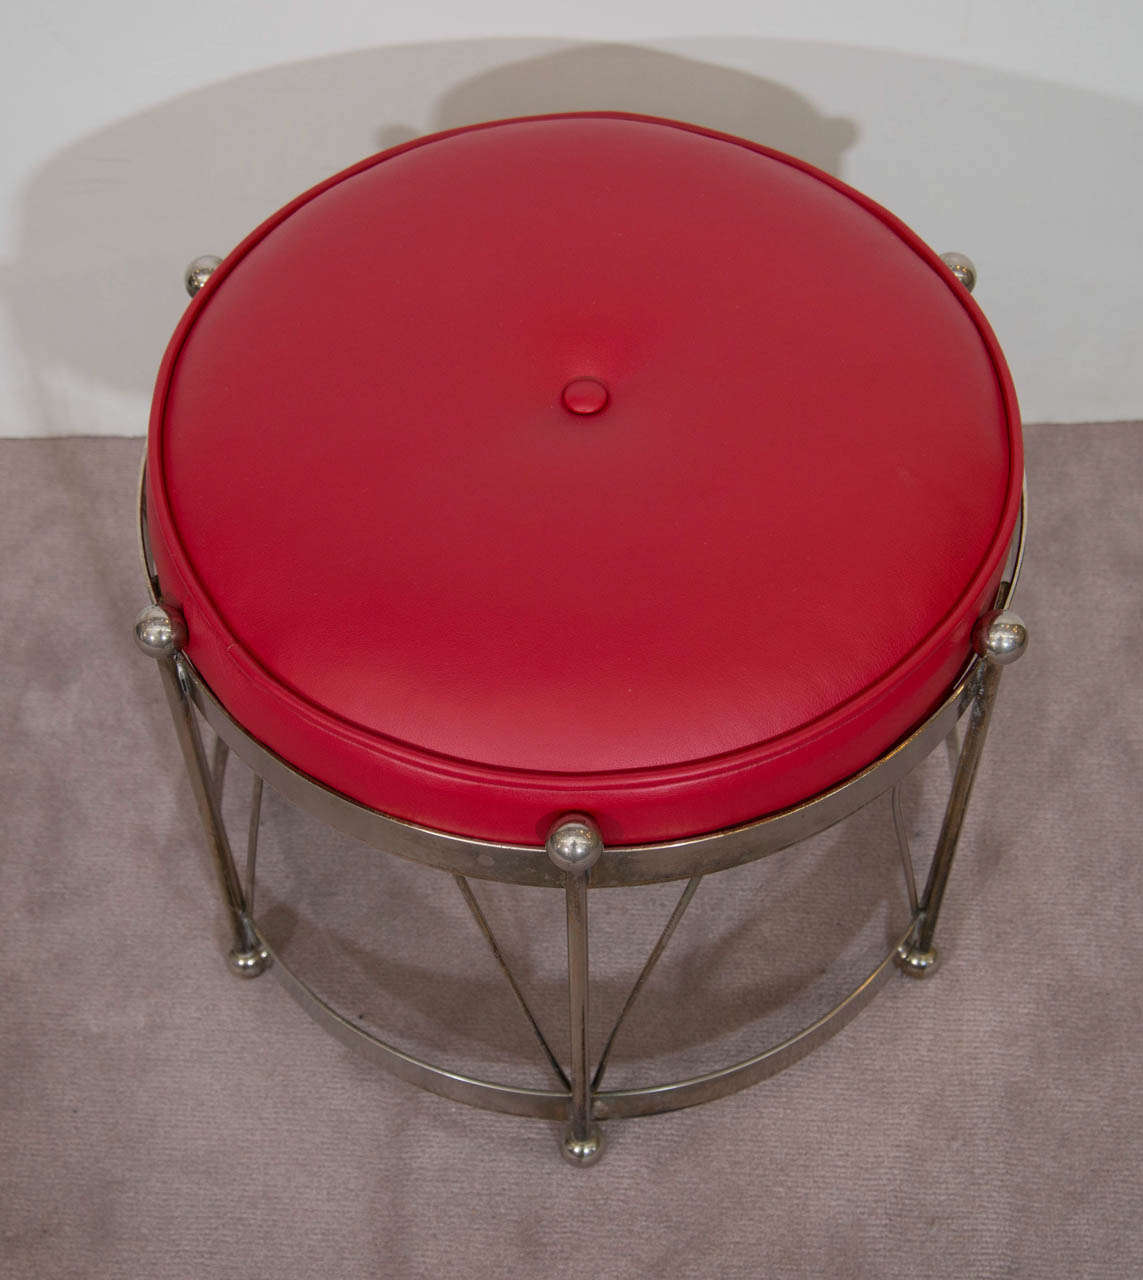 20th Century A Mid Century Chrome Drum Bench With Red Leather Upholstery